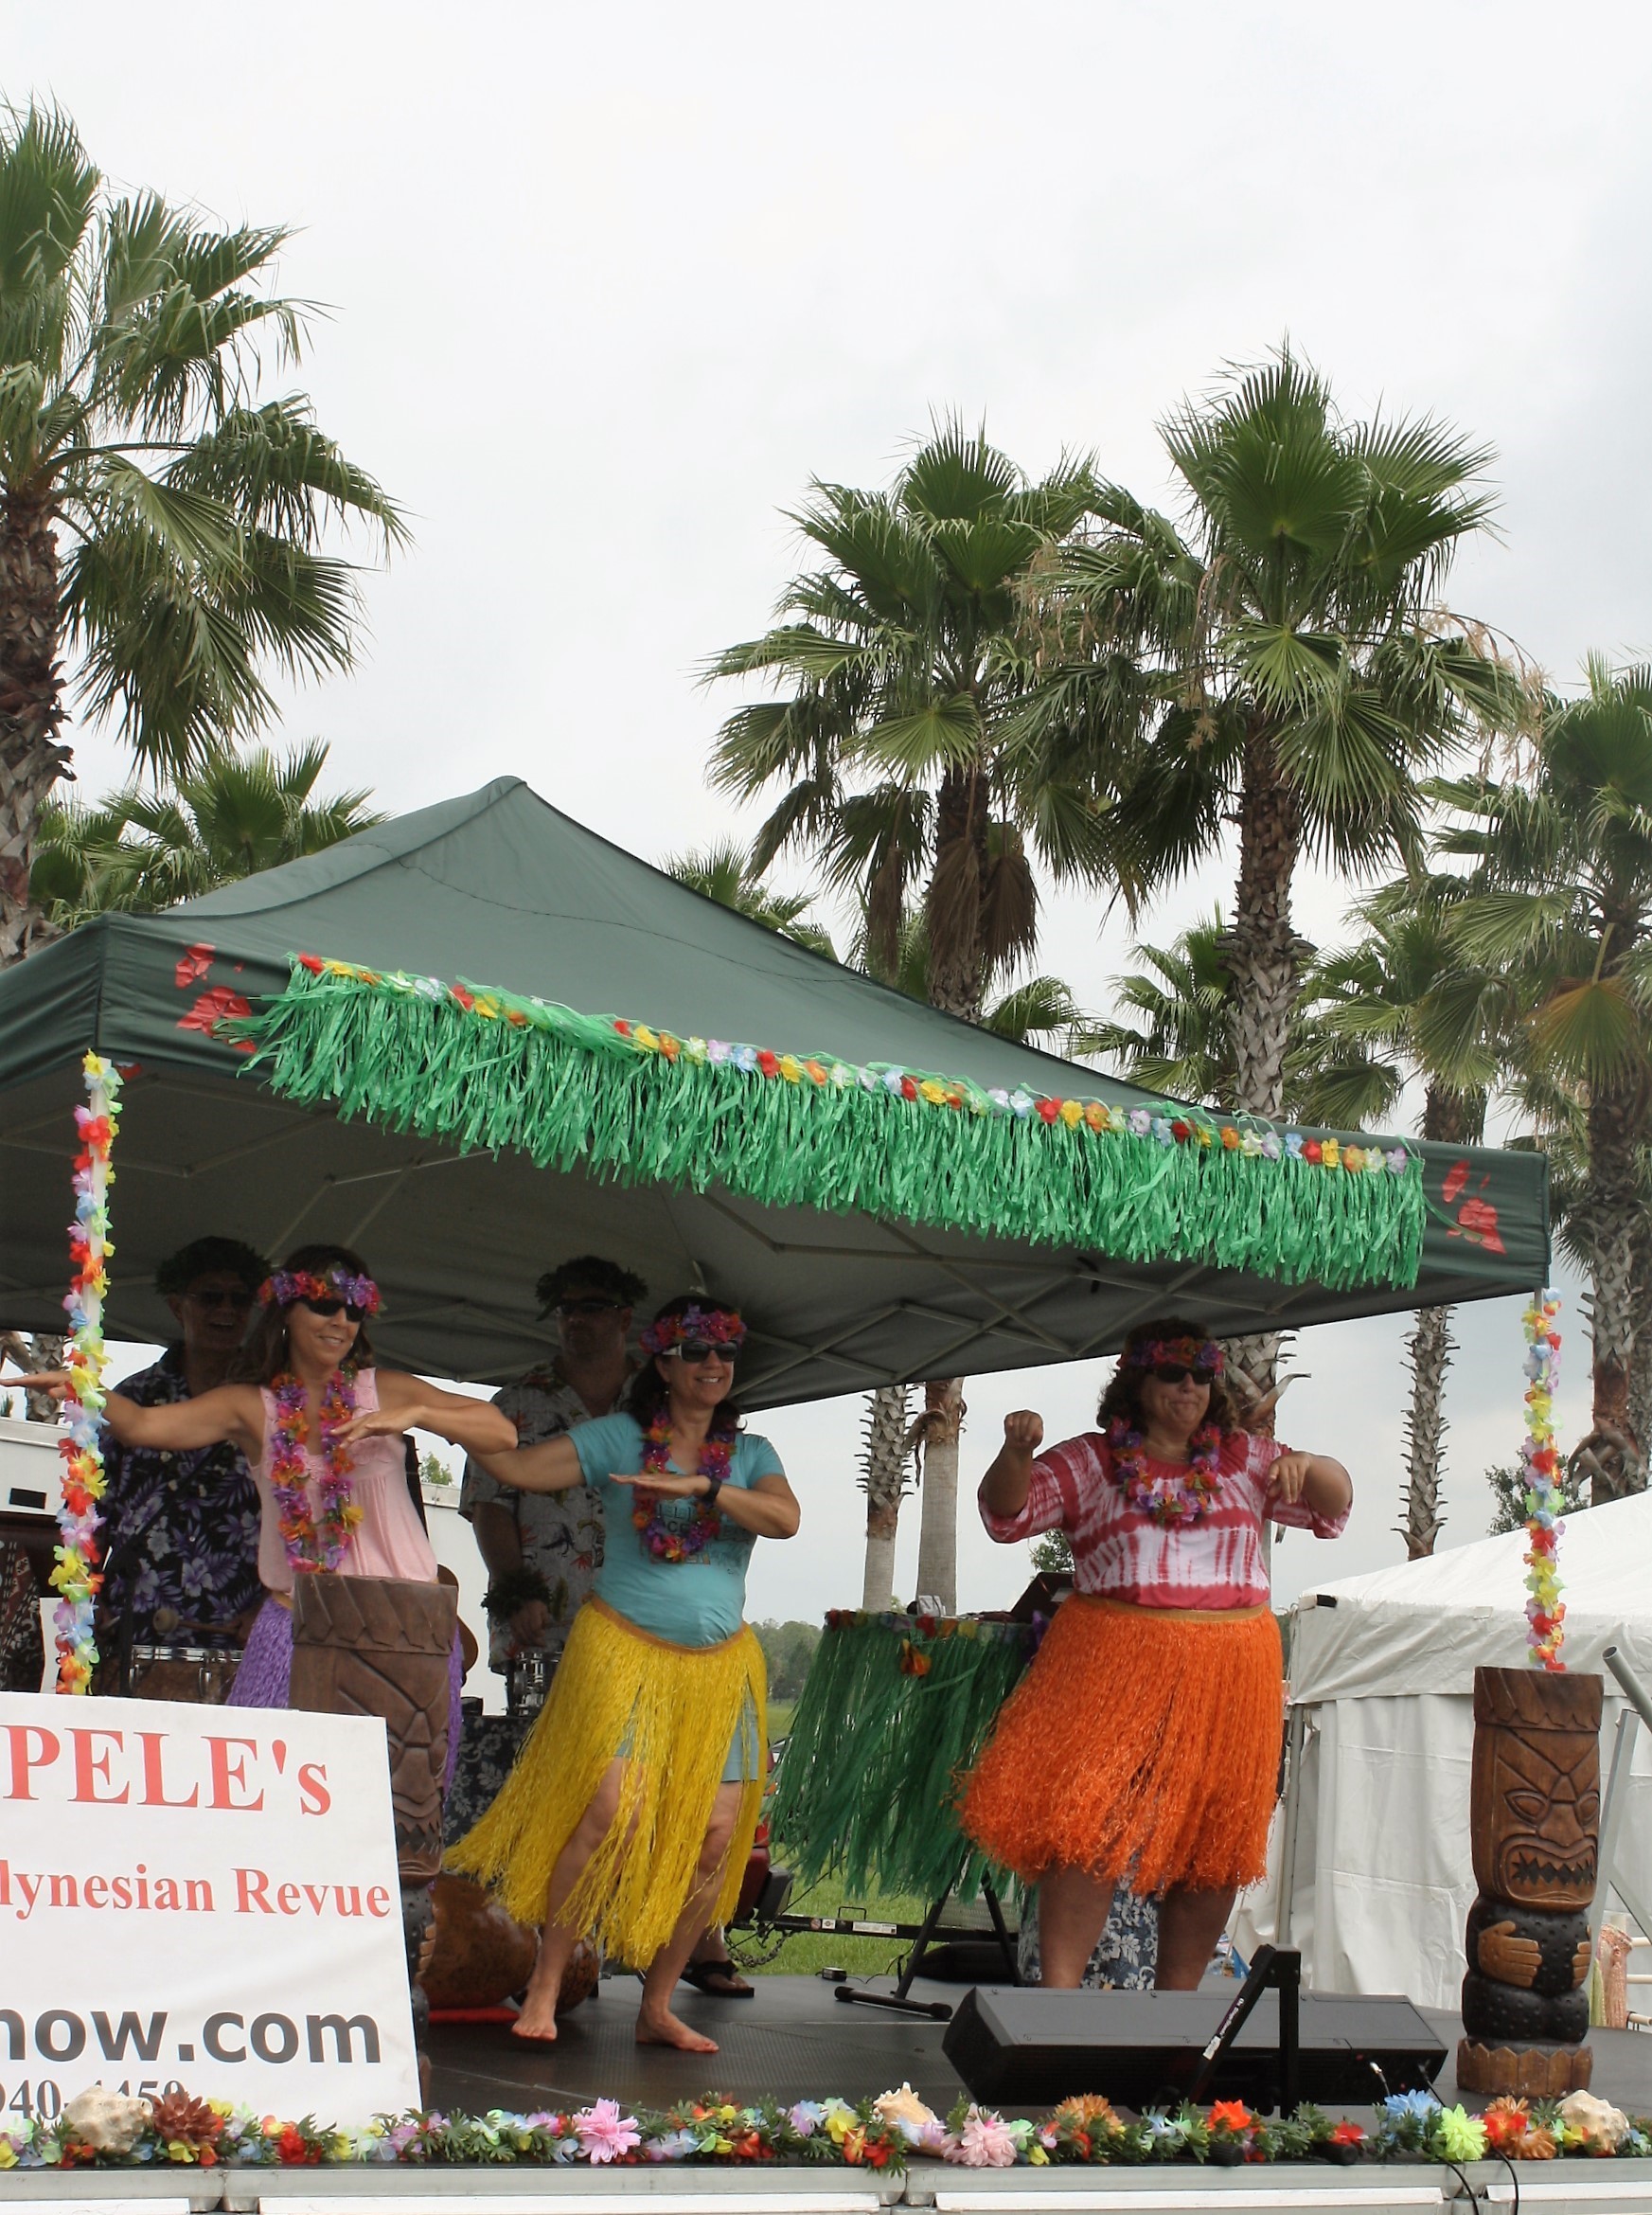 Farmer’s Market attendees get in the act for Prince Pele’s Polynesian Revue.